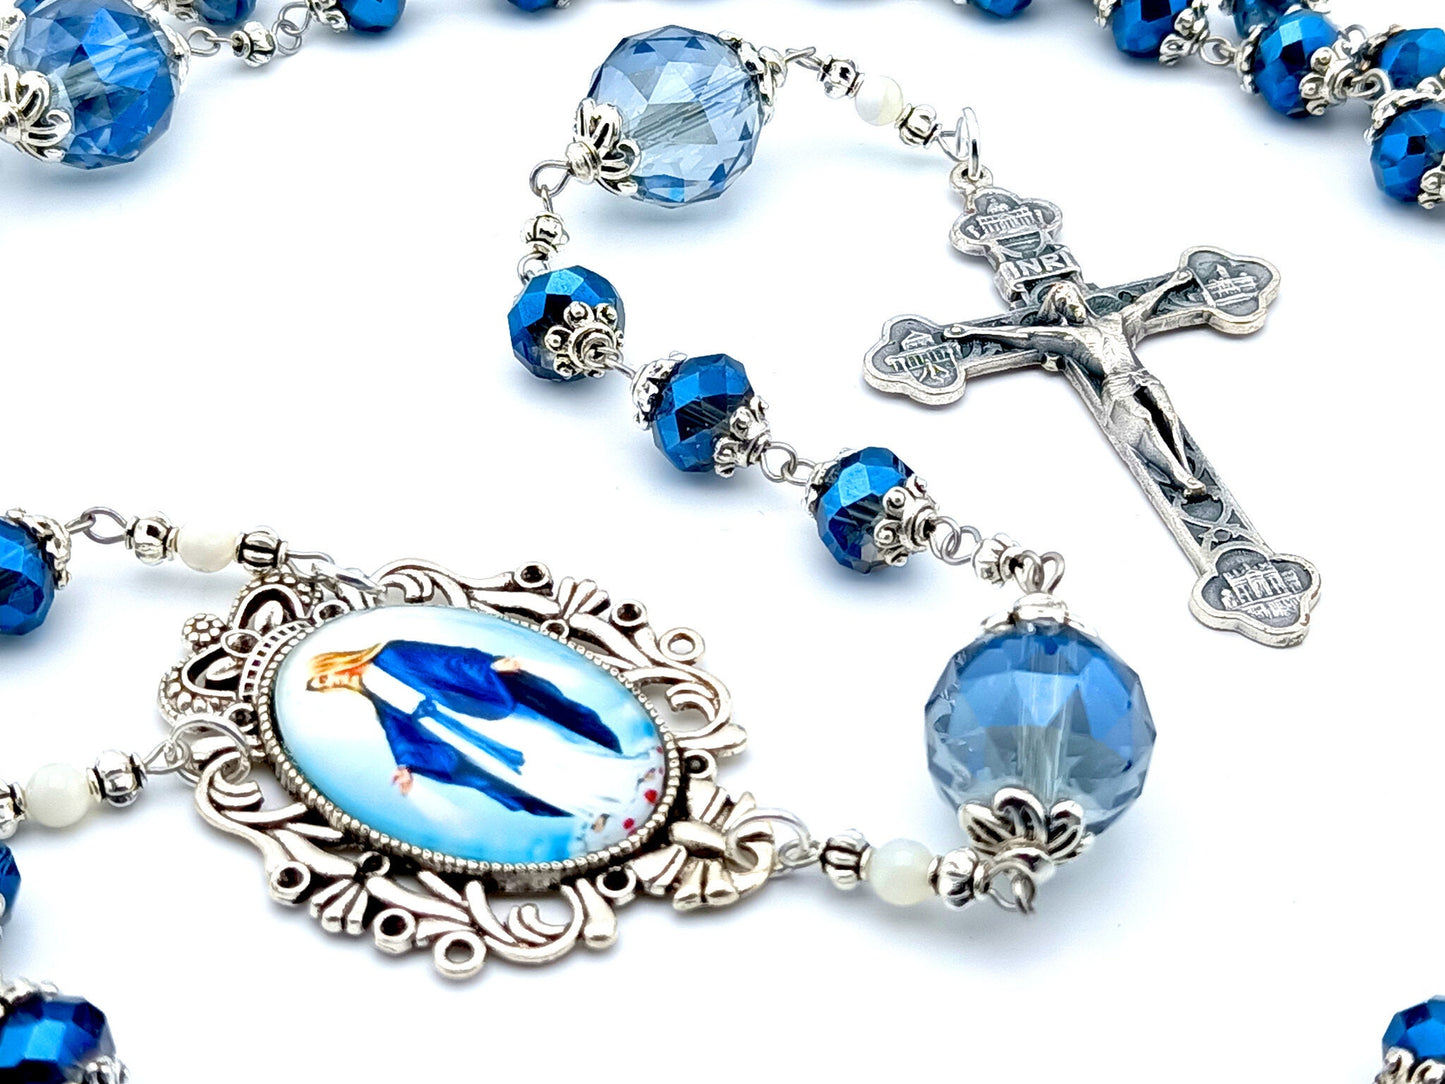 Our Lady of Grace unique rosary beads with blue faceted glass and pearl beads with silver four basilicas crucifix and picture centre medal.